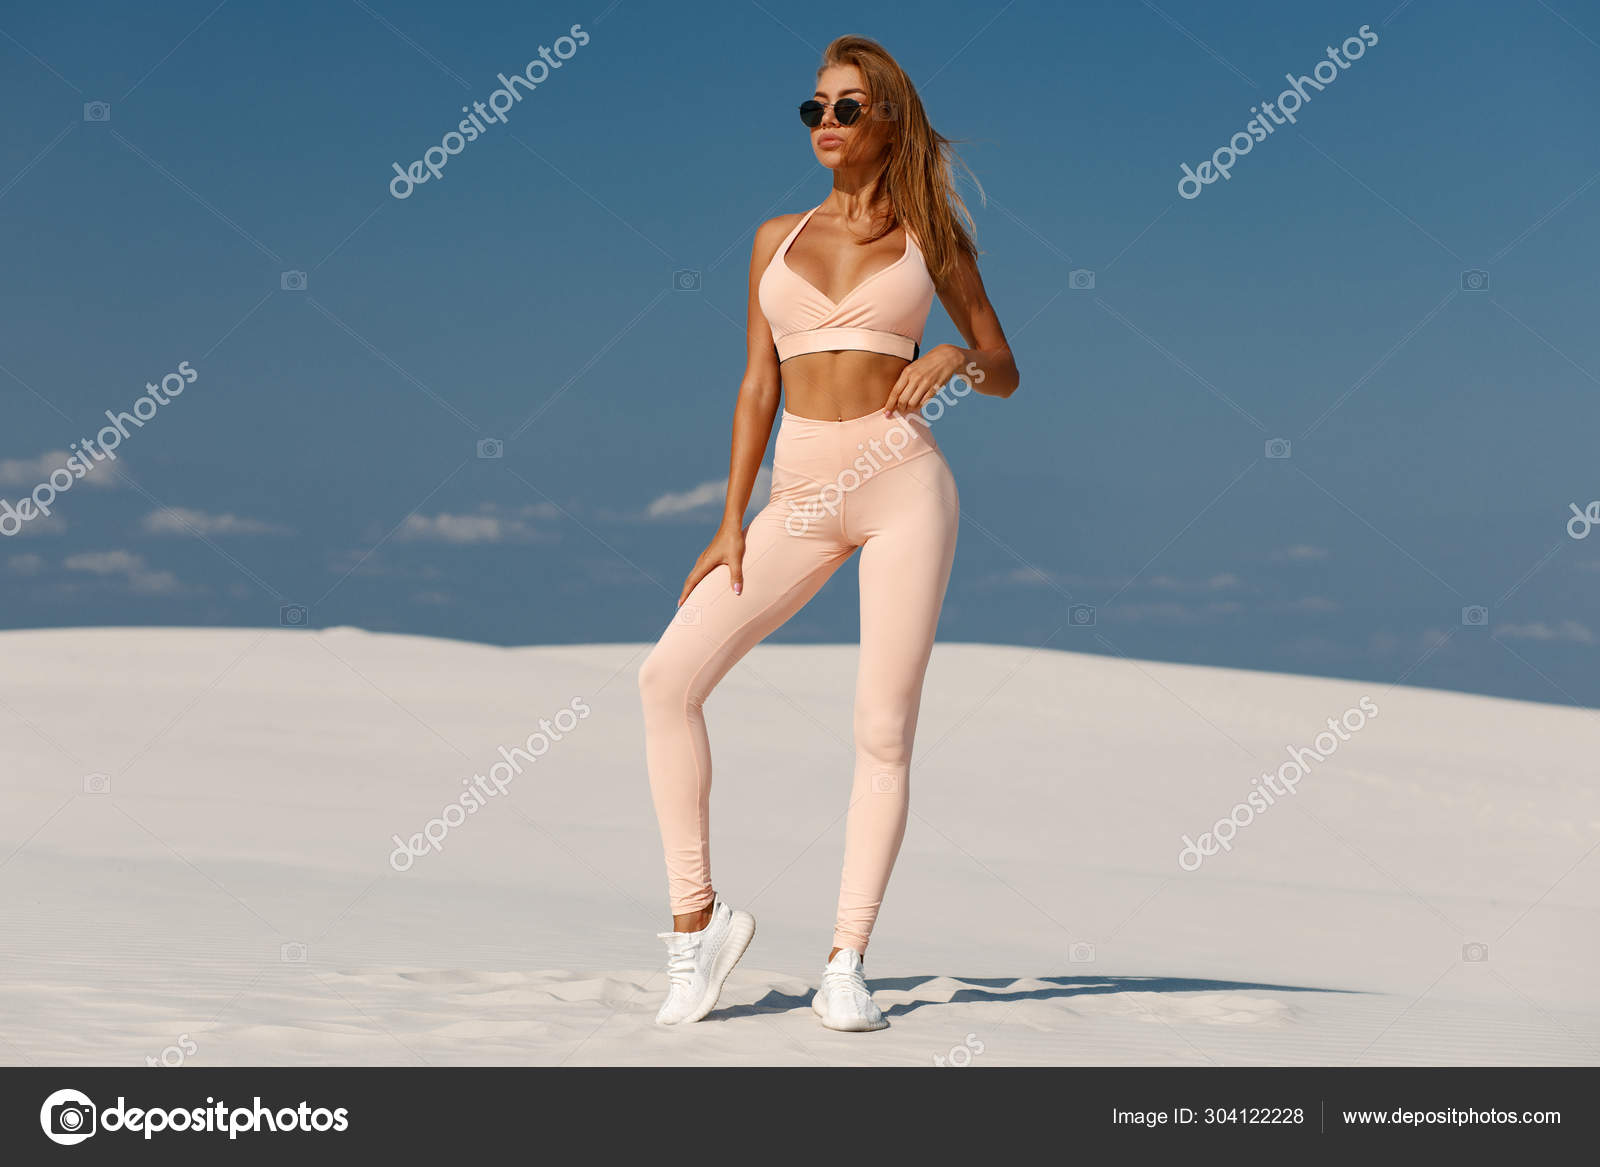 Beautiful fitness woman outdoors. Athletic girl in leggings Stock Photo